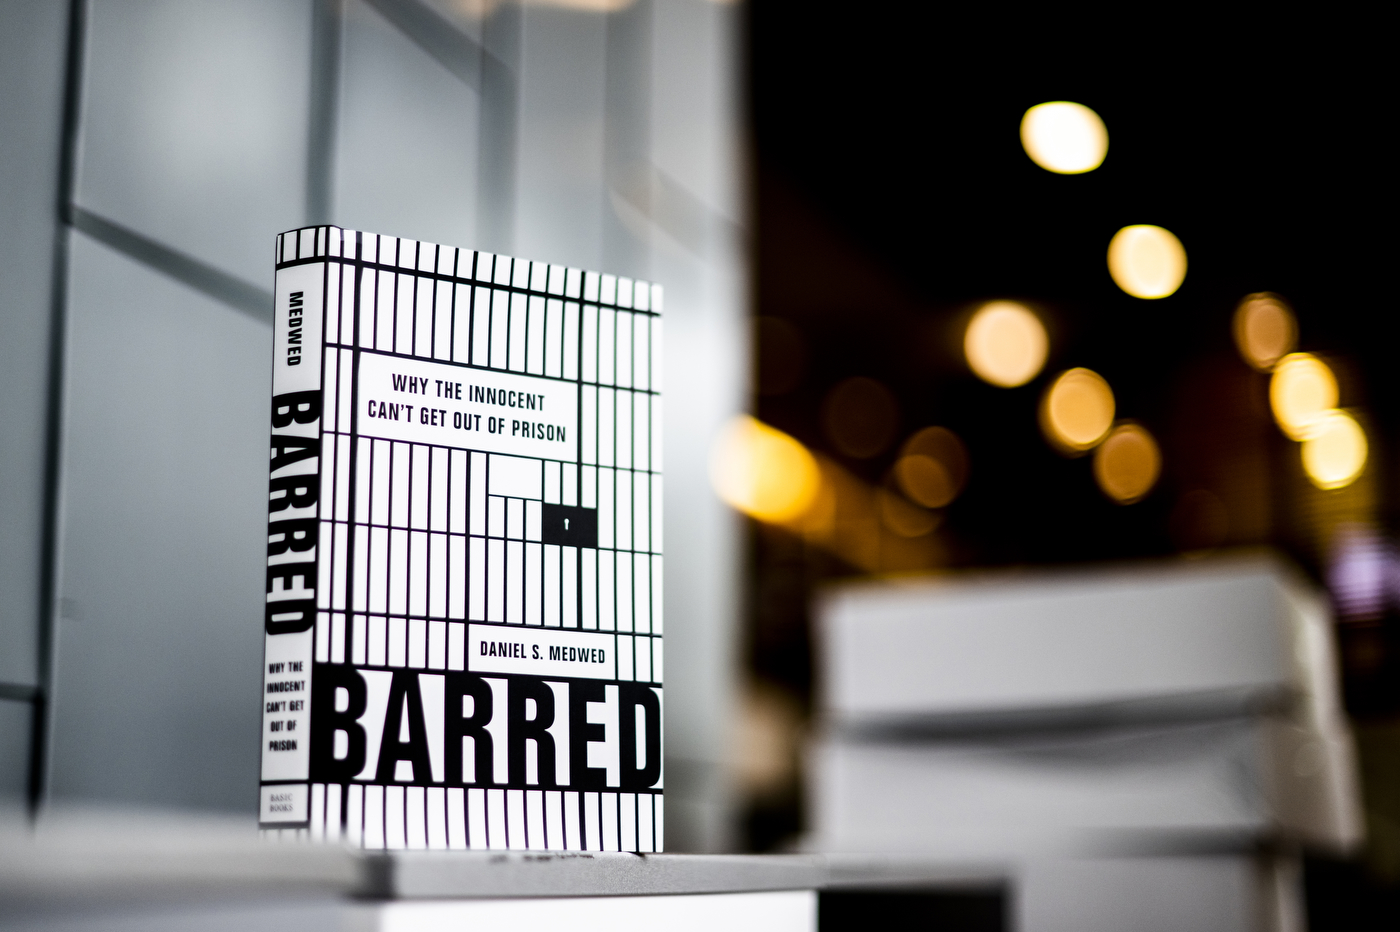 A book titled "Barred: Why the Innocent Can't Get Out of Prison" is about how technicalities keep people in prison.